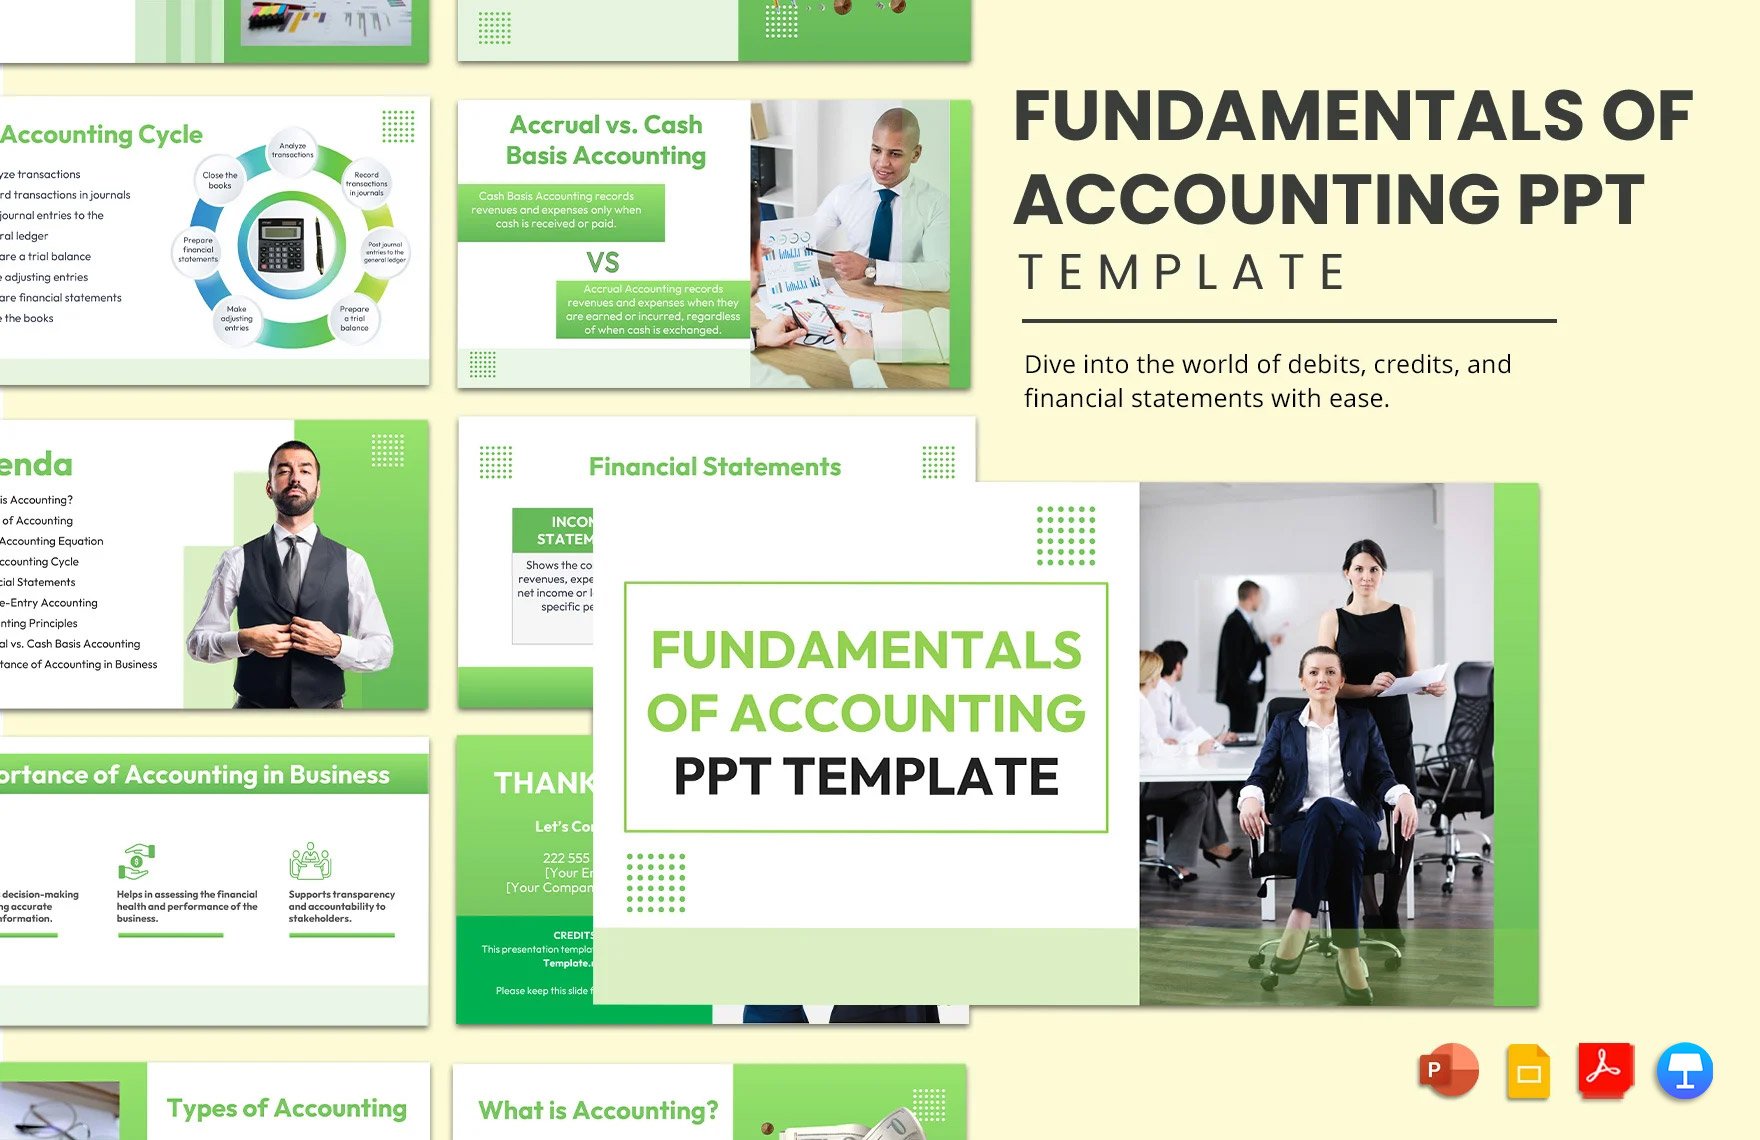 Fundamentals of Accounting PPT Template in PDF, PowerPoint, Google Slides, Apple Keynote